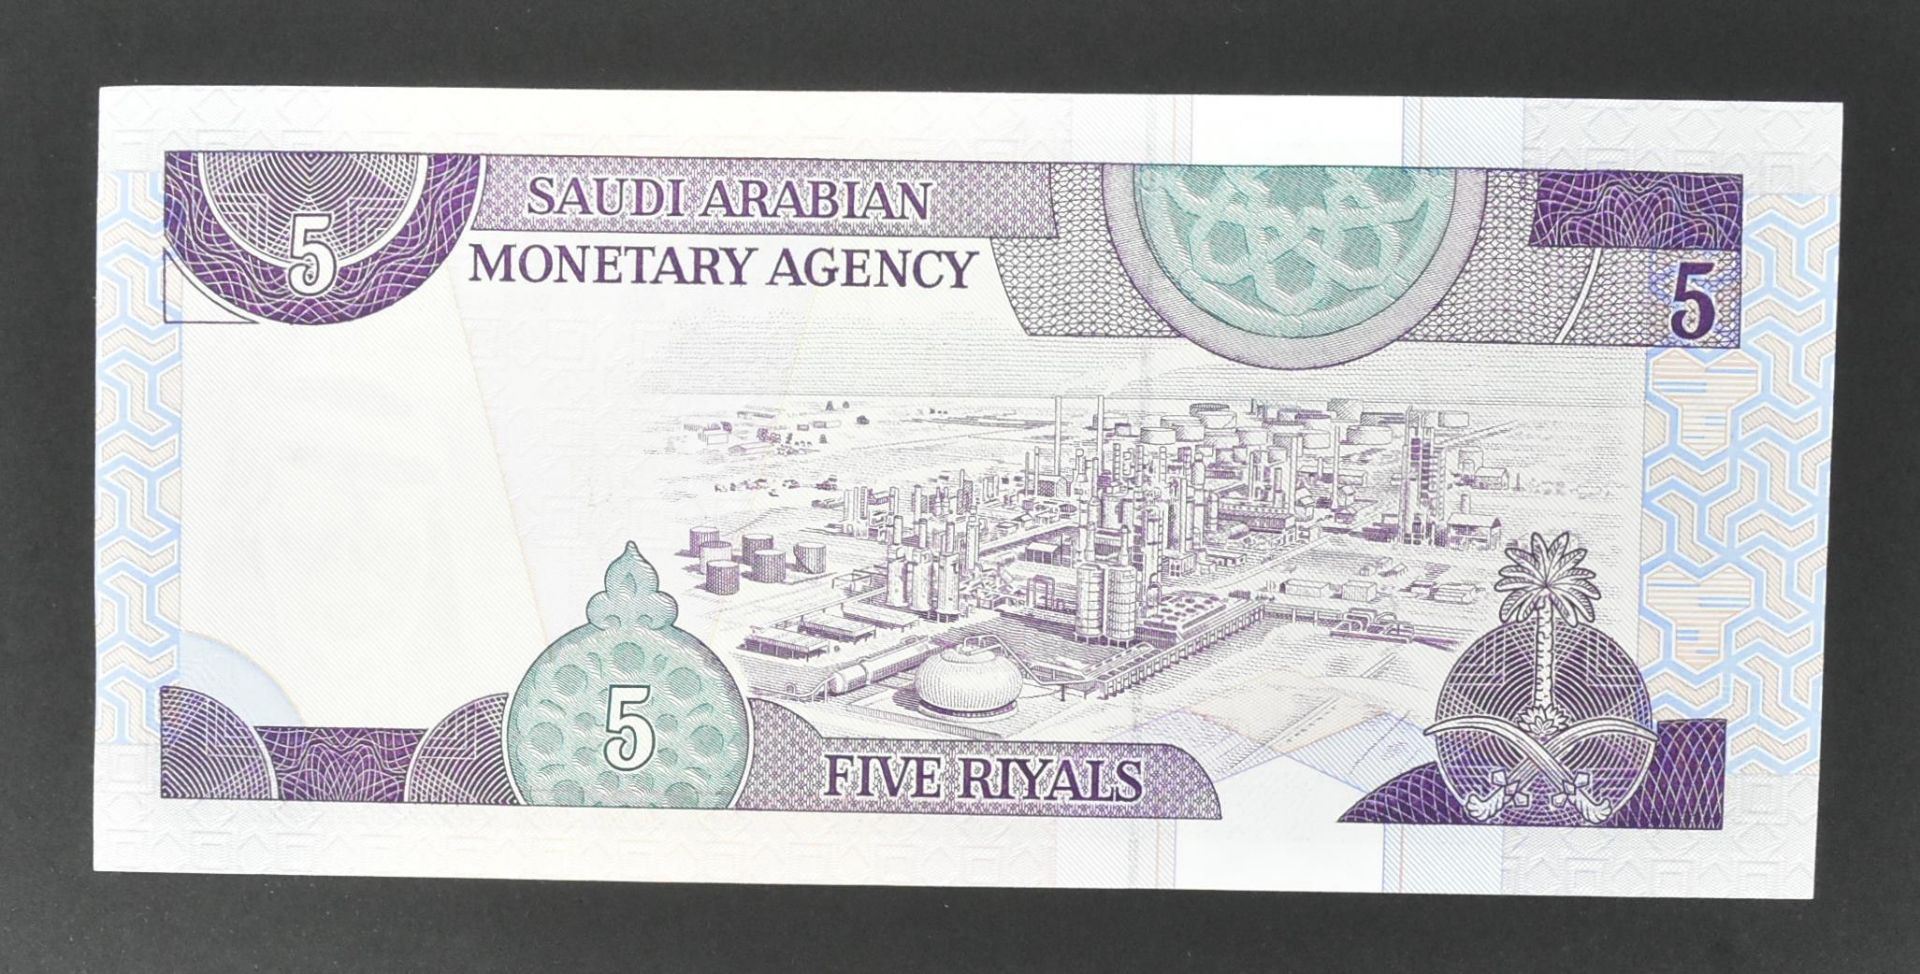 COLLECTION OF INTERNATIONAL UNCIRCULATED BANK NOTES - OMAN - Image 24 of 51